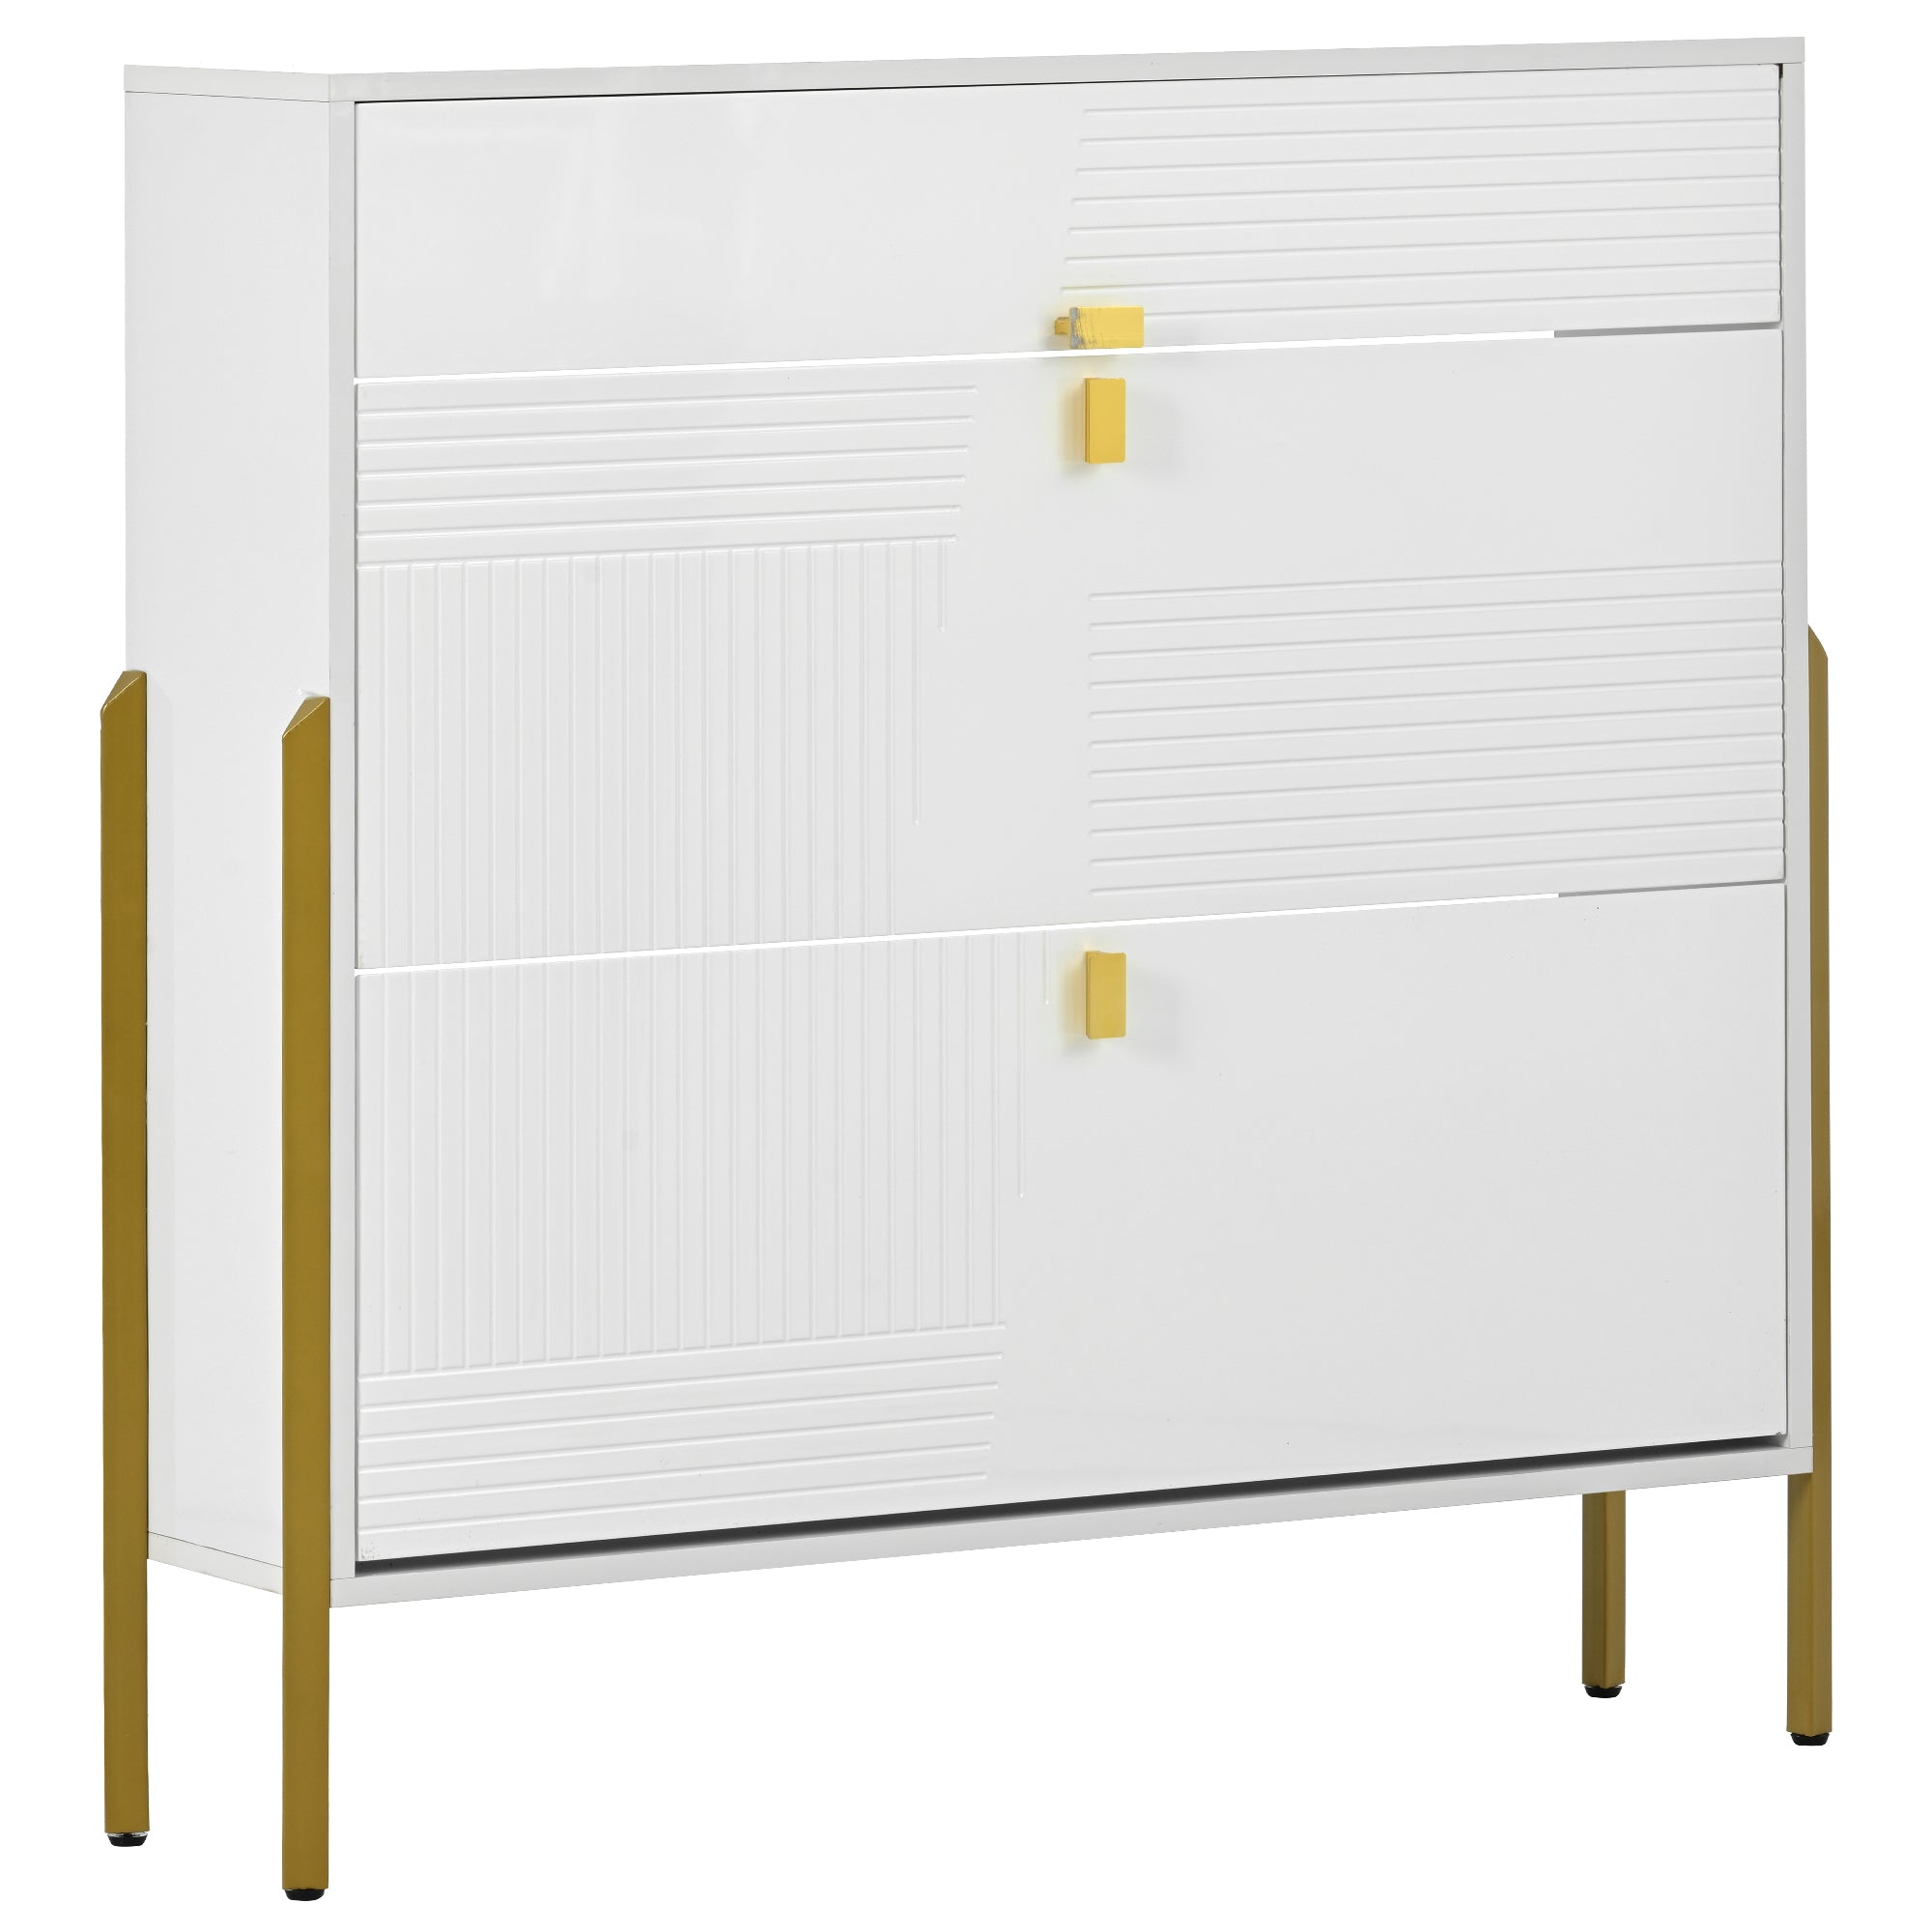 37.80" White Shoe Cabinet with Flip Drawers and Gold Metal legs